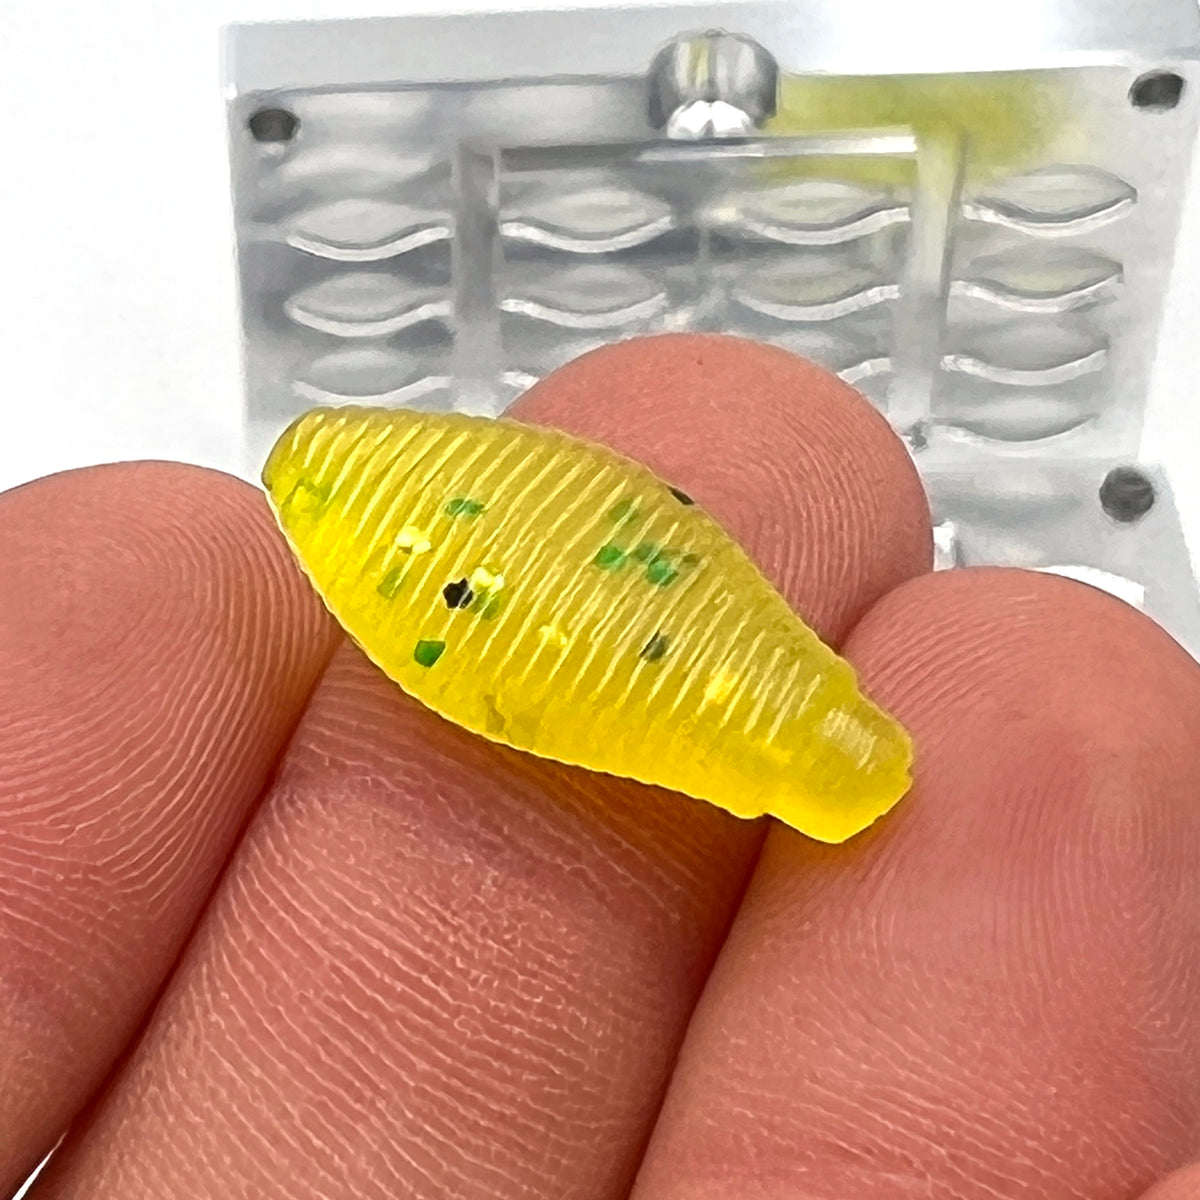 2.5 Inch Ned Craw Hand Injection Mold – Epic Bait Molds